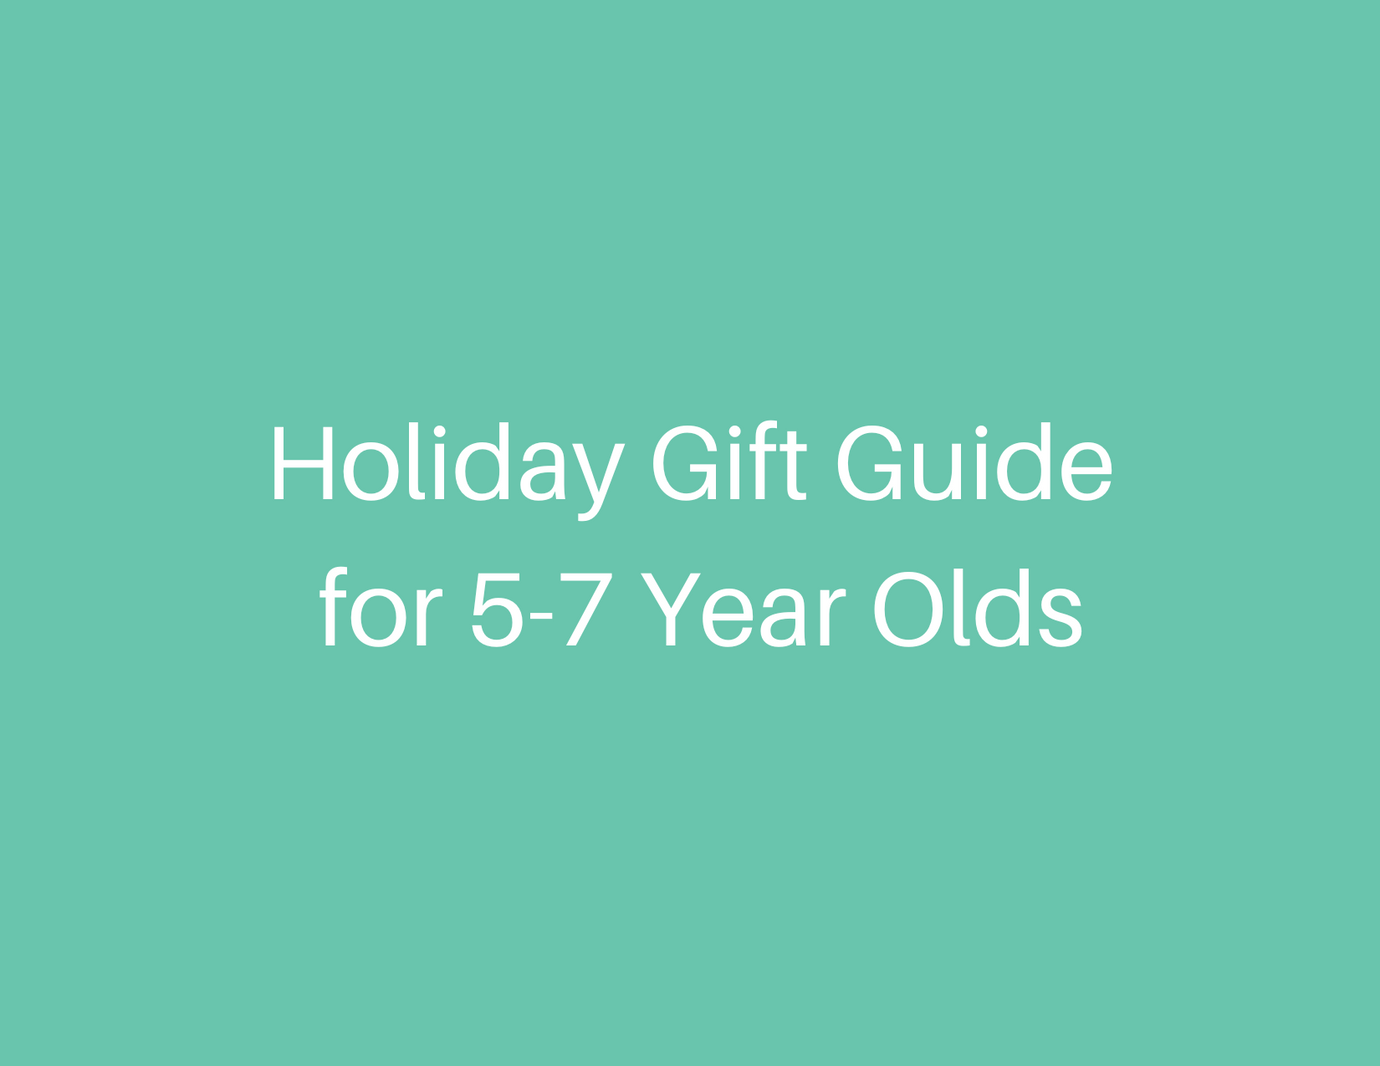 Holiday Gift Guides for the 5-7 Year Olds